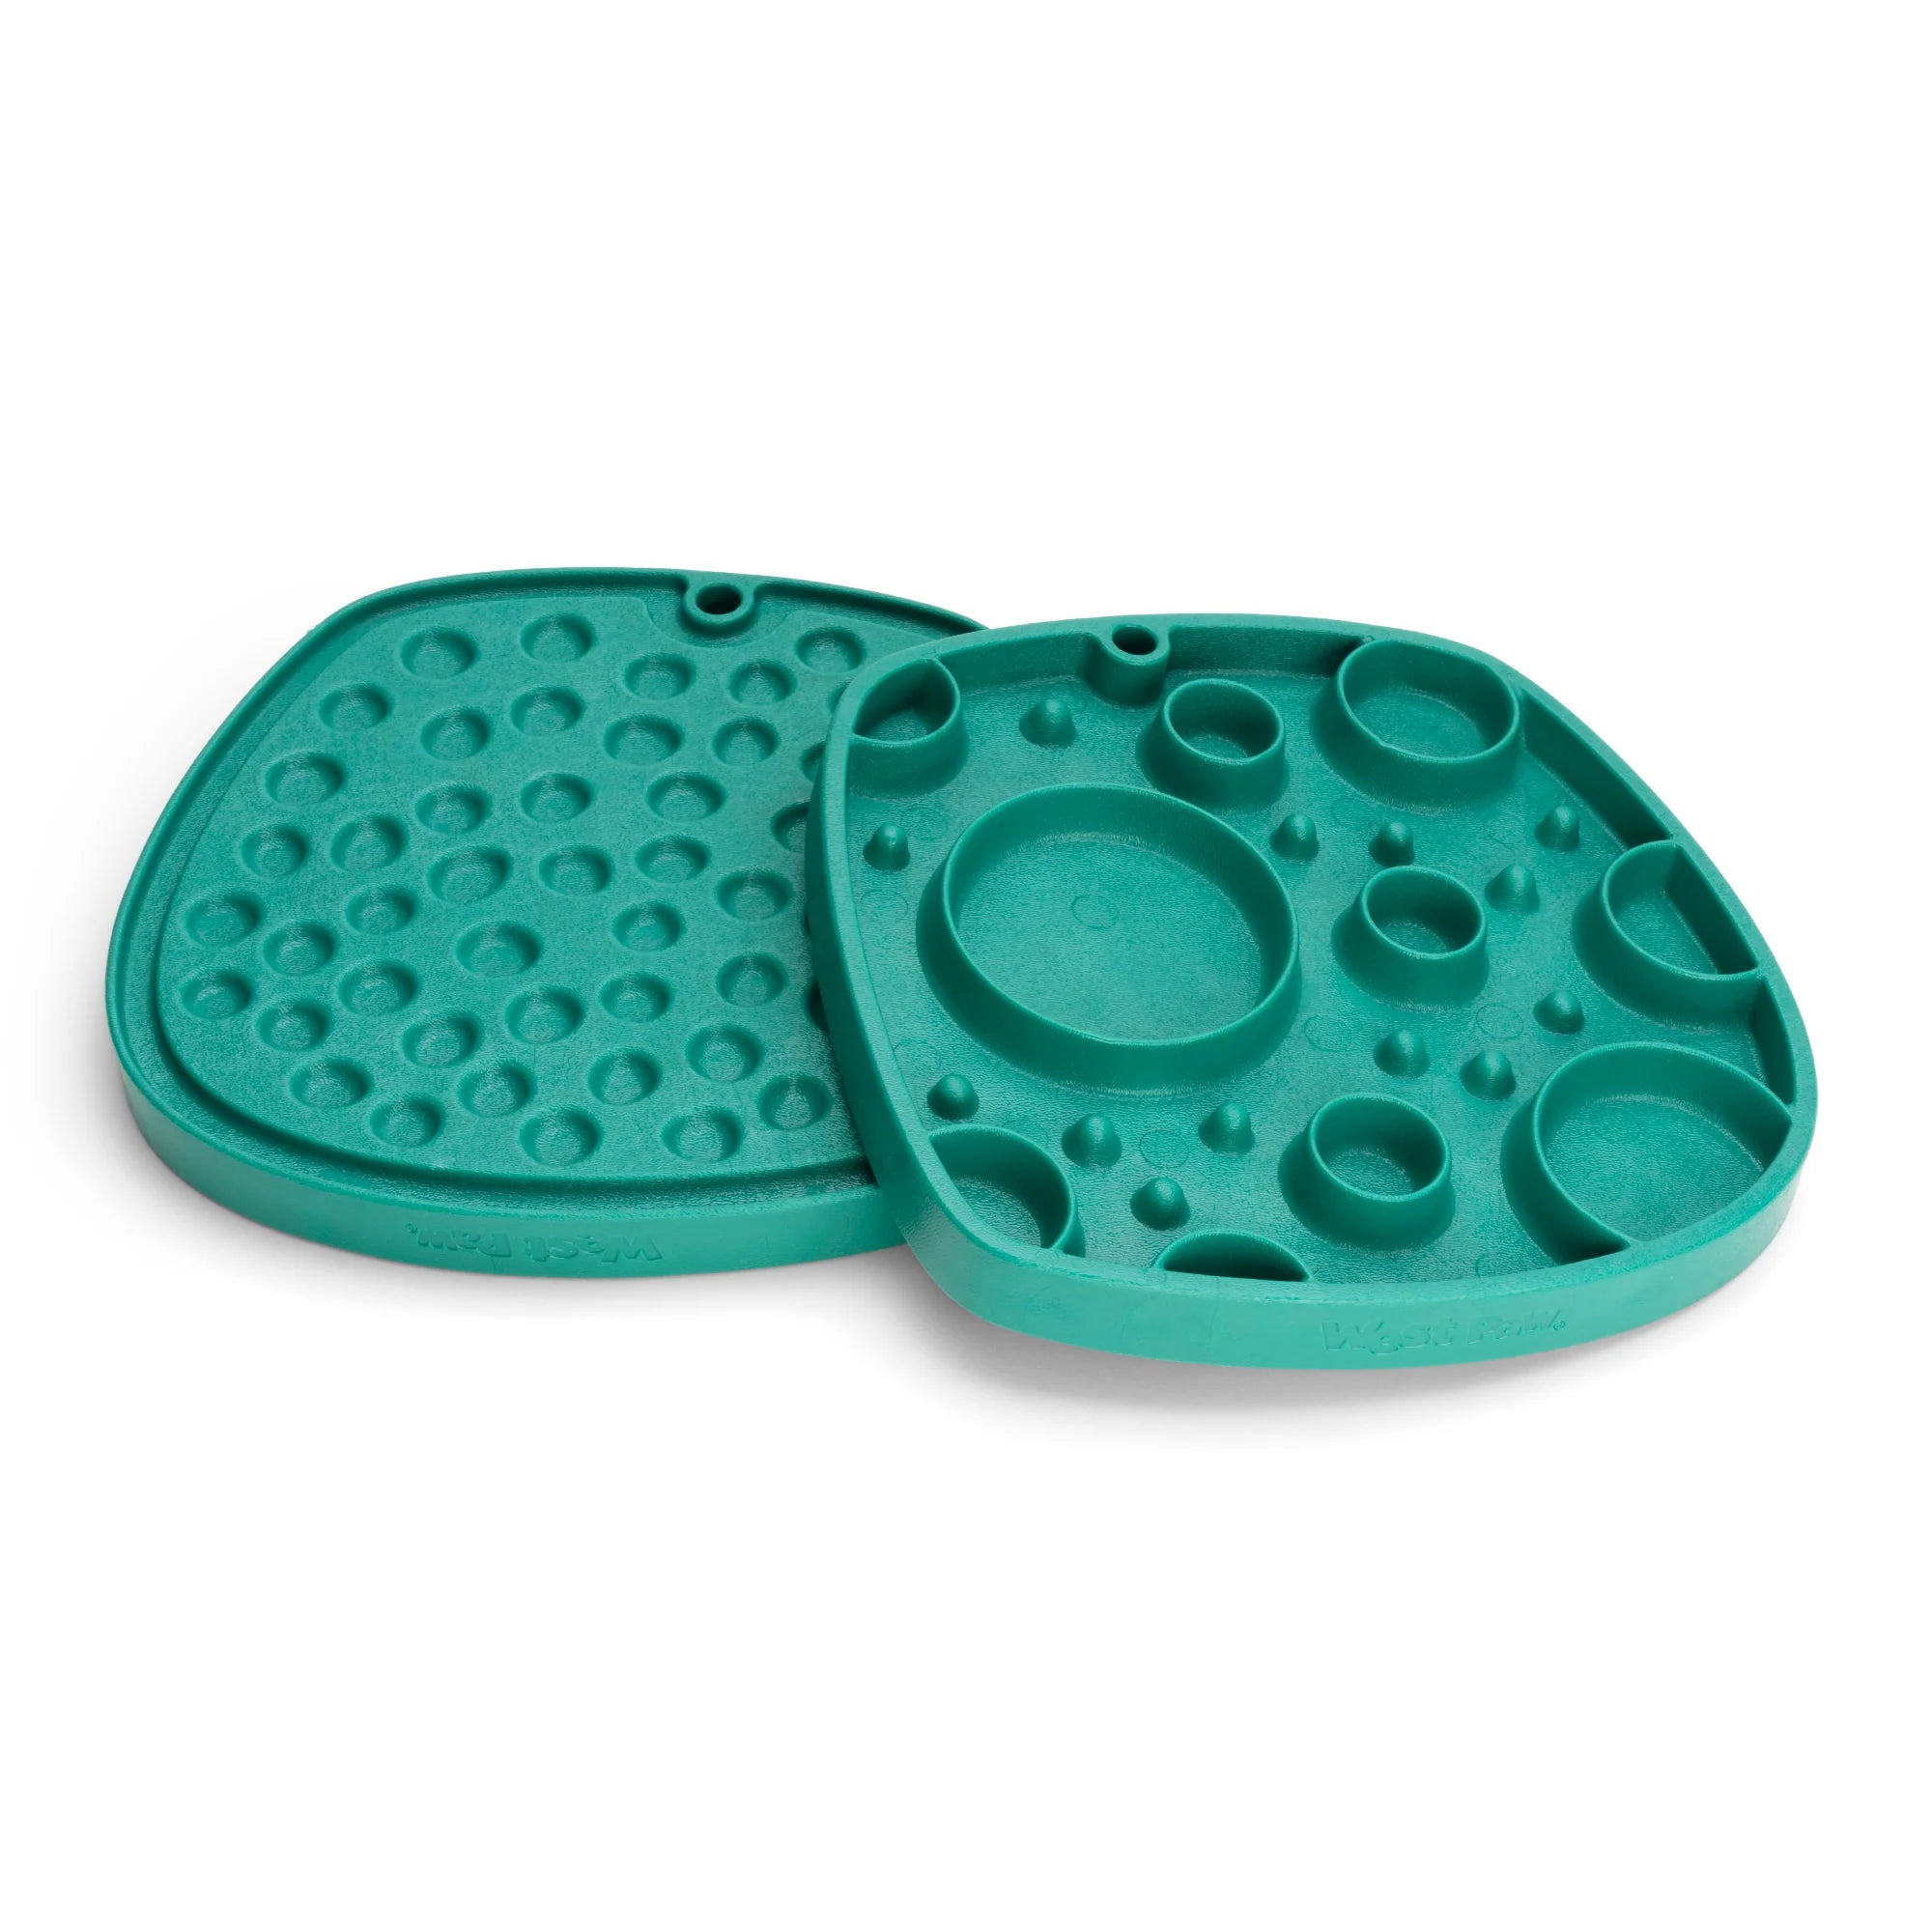 Encourage your dog to feast the way nature intended with the all-in-one innovative enrichment mat that brings a slow feeder and lick mat together to provide an engaging variety between feeding and treating.